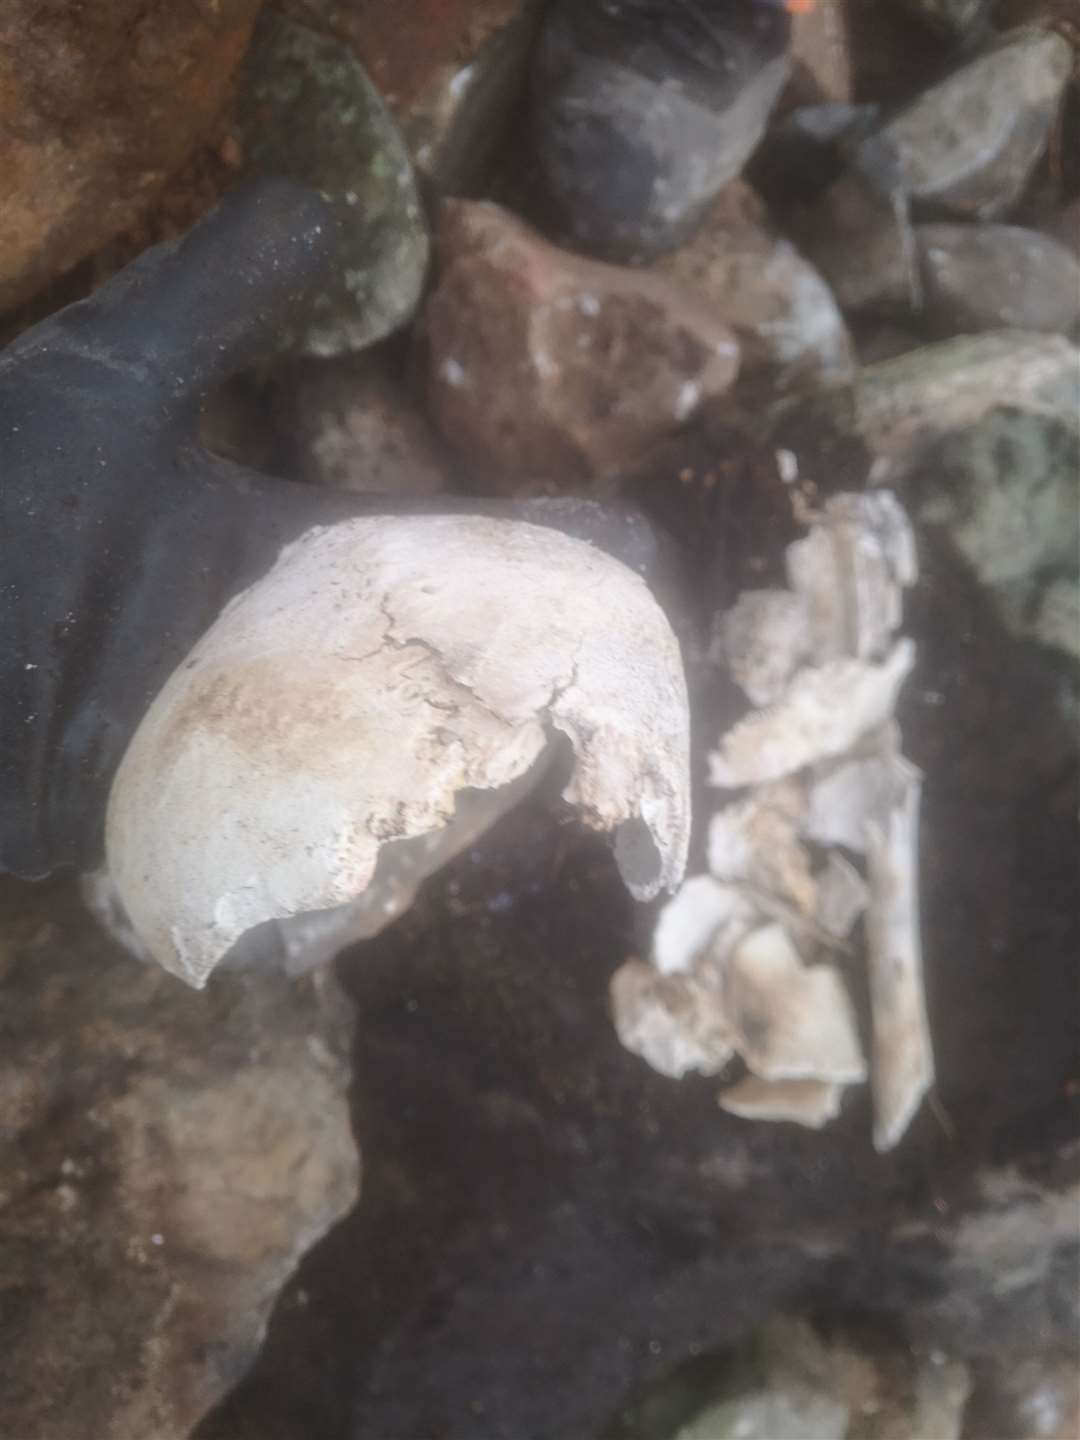 The partial skull and other bones found on the estate.